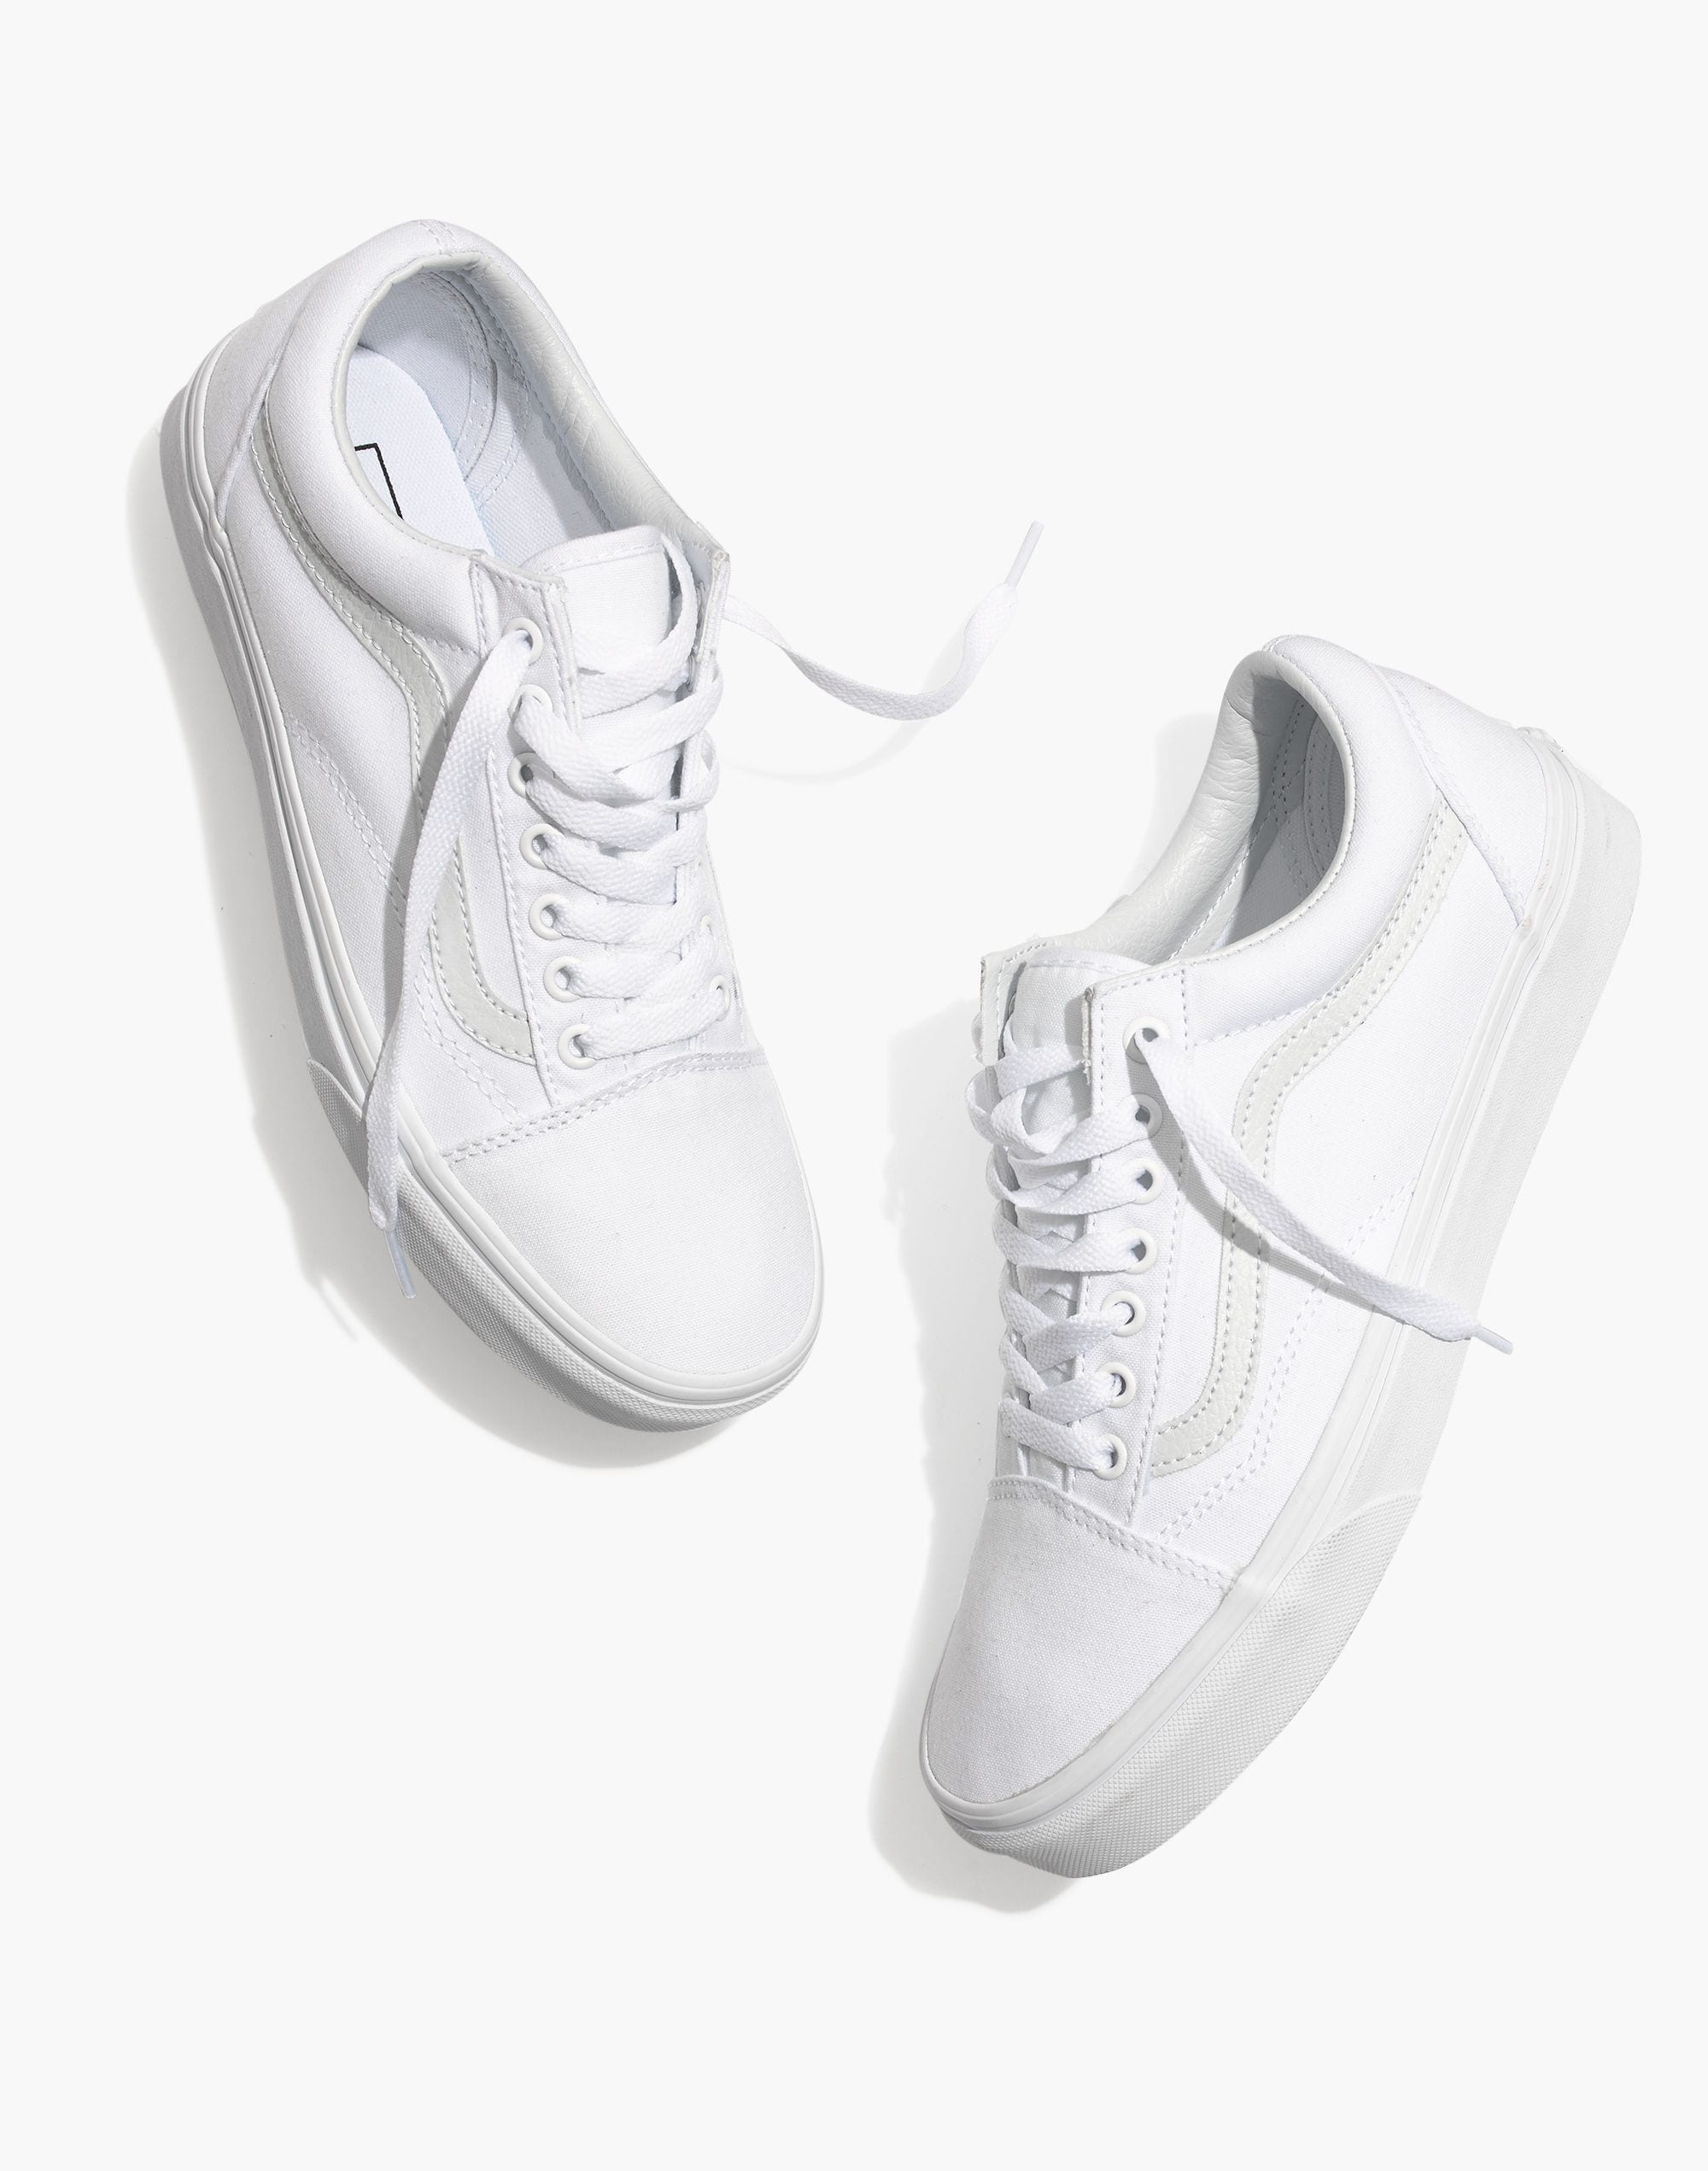 Vans® Unisex Old Skool Lace-Up Sneakers in Canvas and Suede